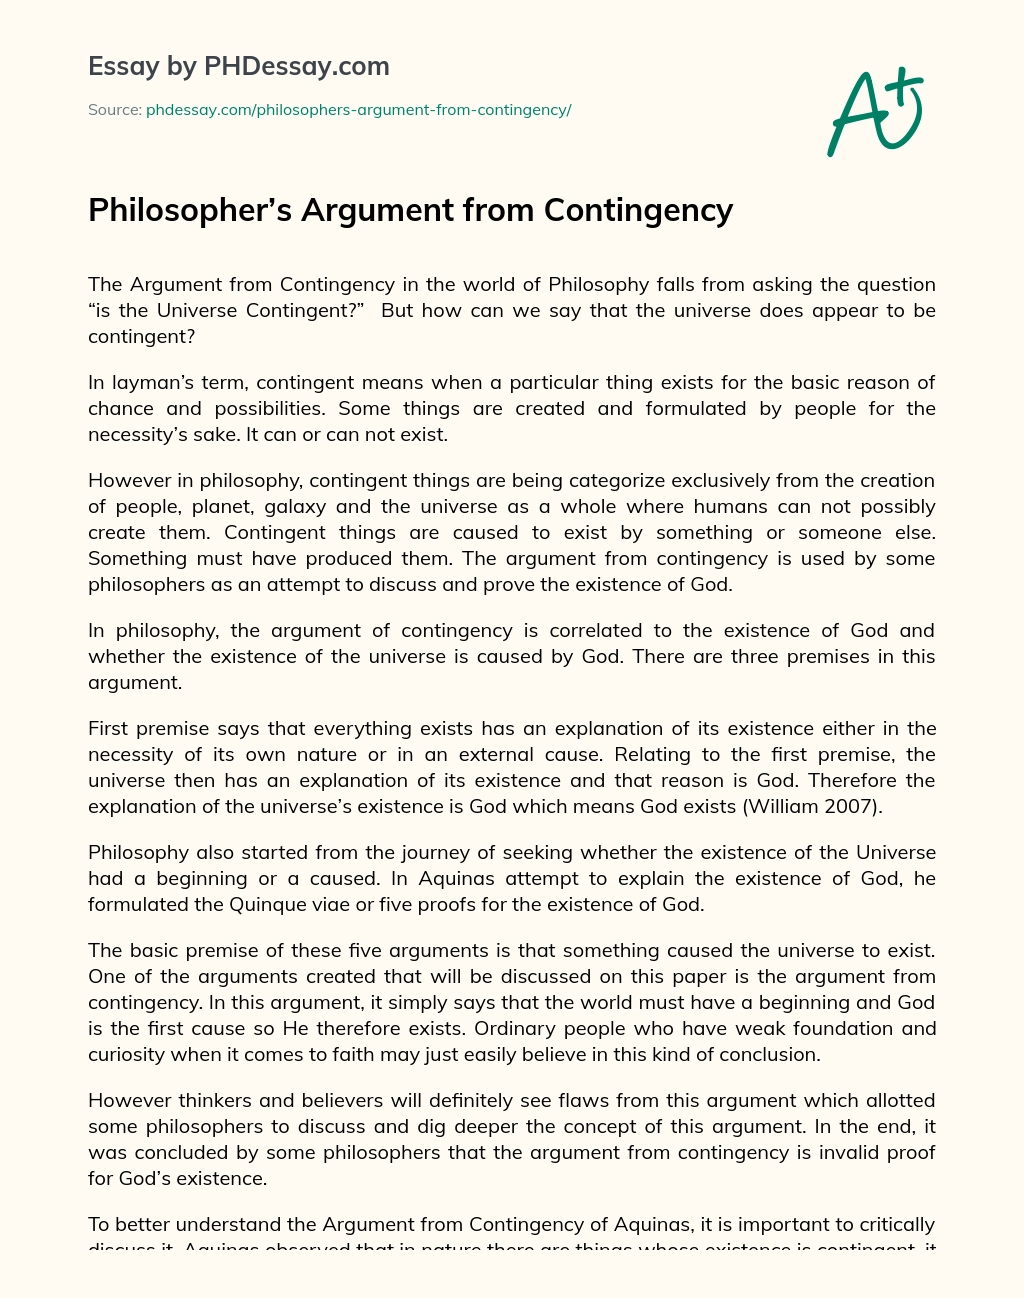 Philosopher’s Argument from Contingency essay